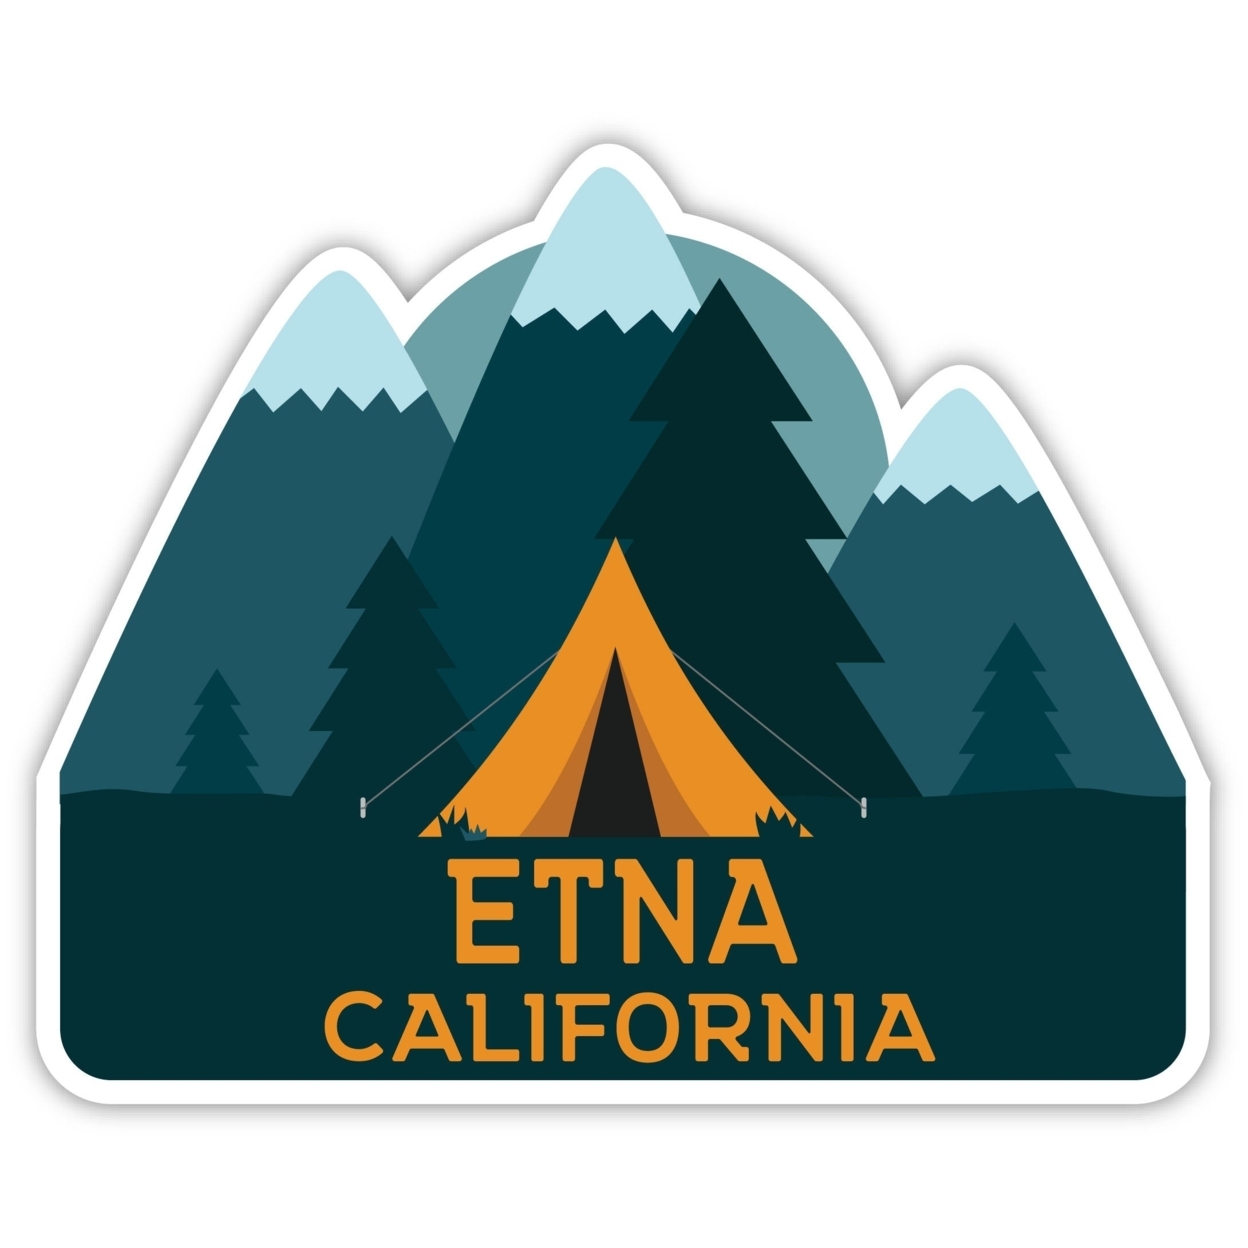 Etna California Souvenir Decorative Stickers (Choose Theme And Size) - 4-Pack, 2-Inch, Tent